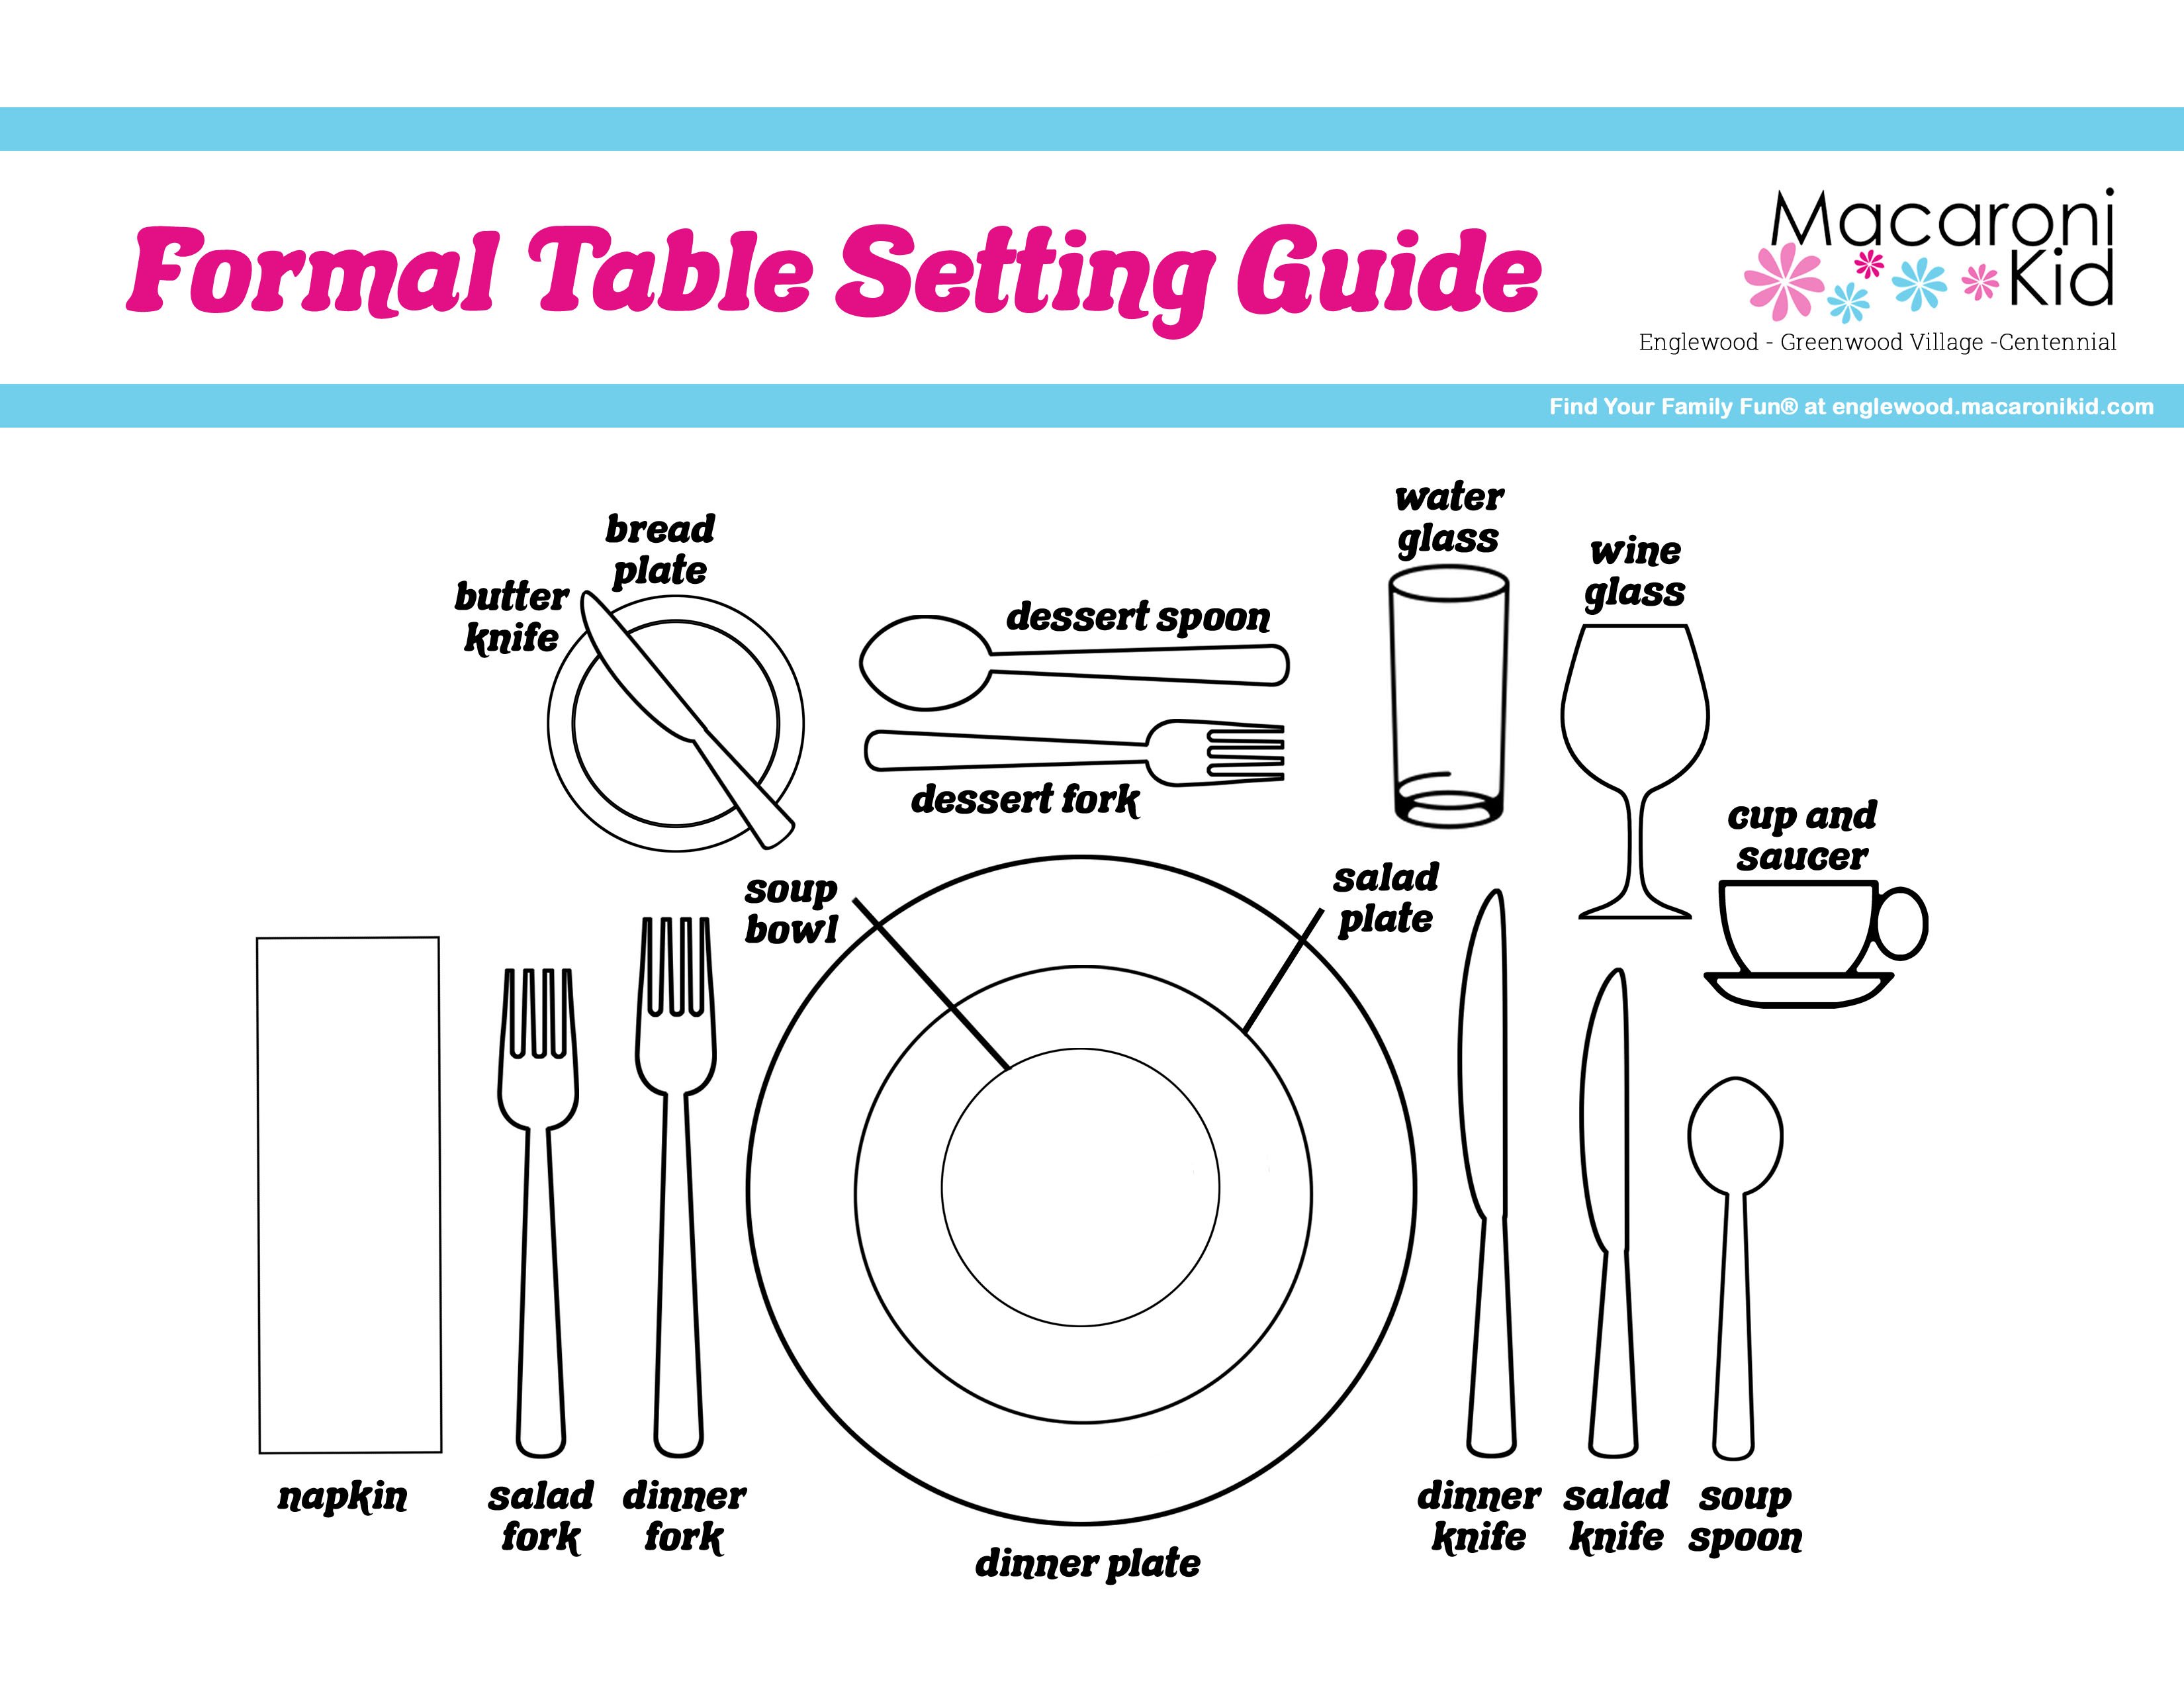 Host a Formal Dinner to Teach Table Setting & Mealtime Etiquette